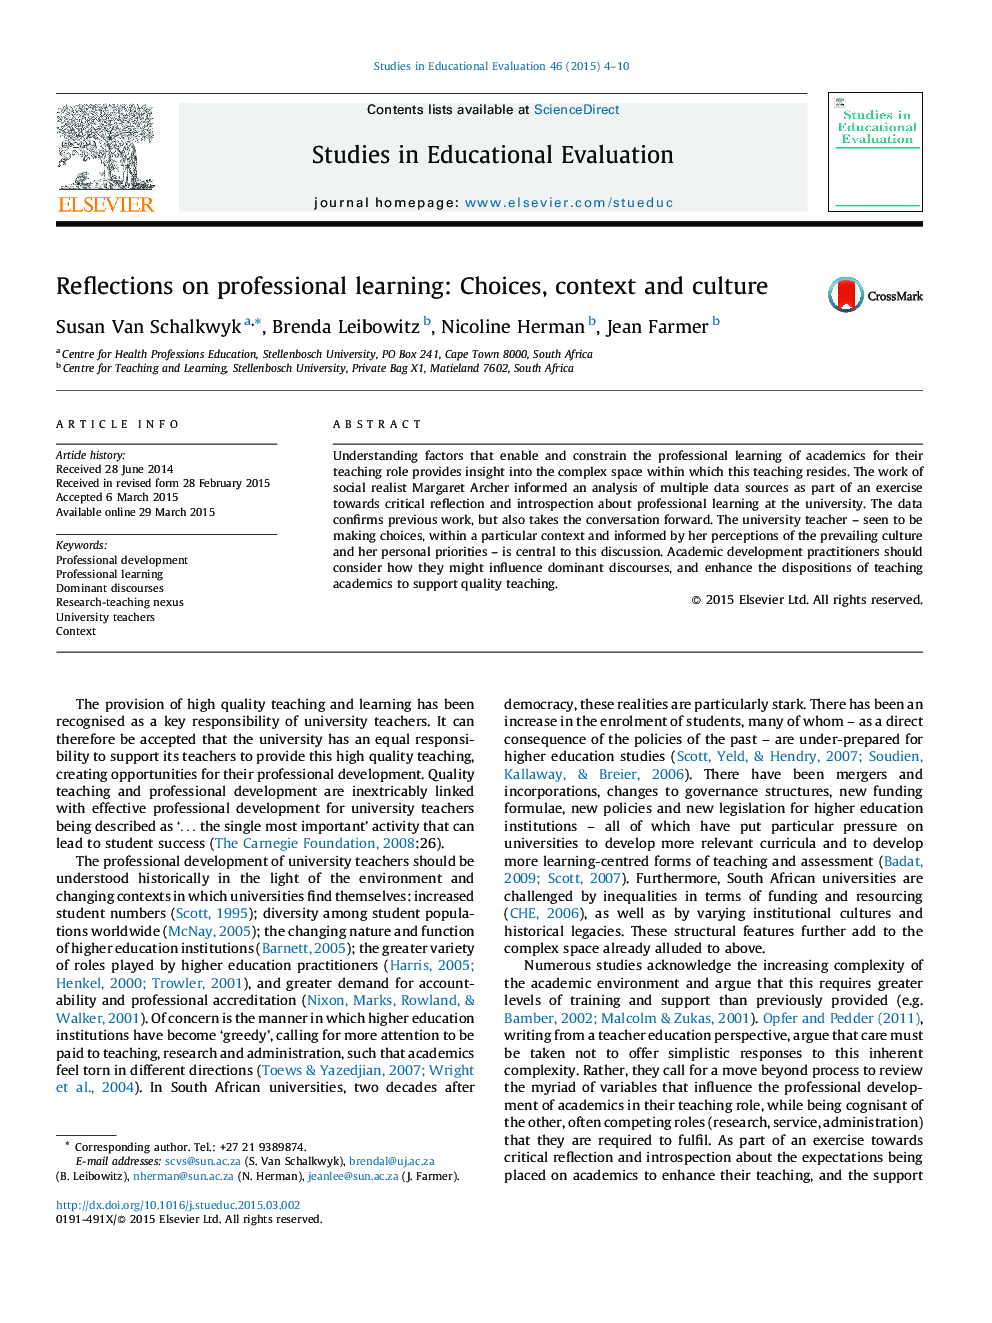 Reflections on professional learning: Choices, context and culture